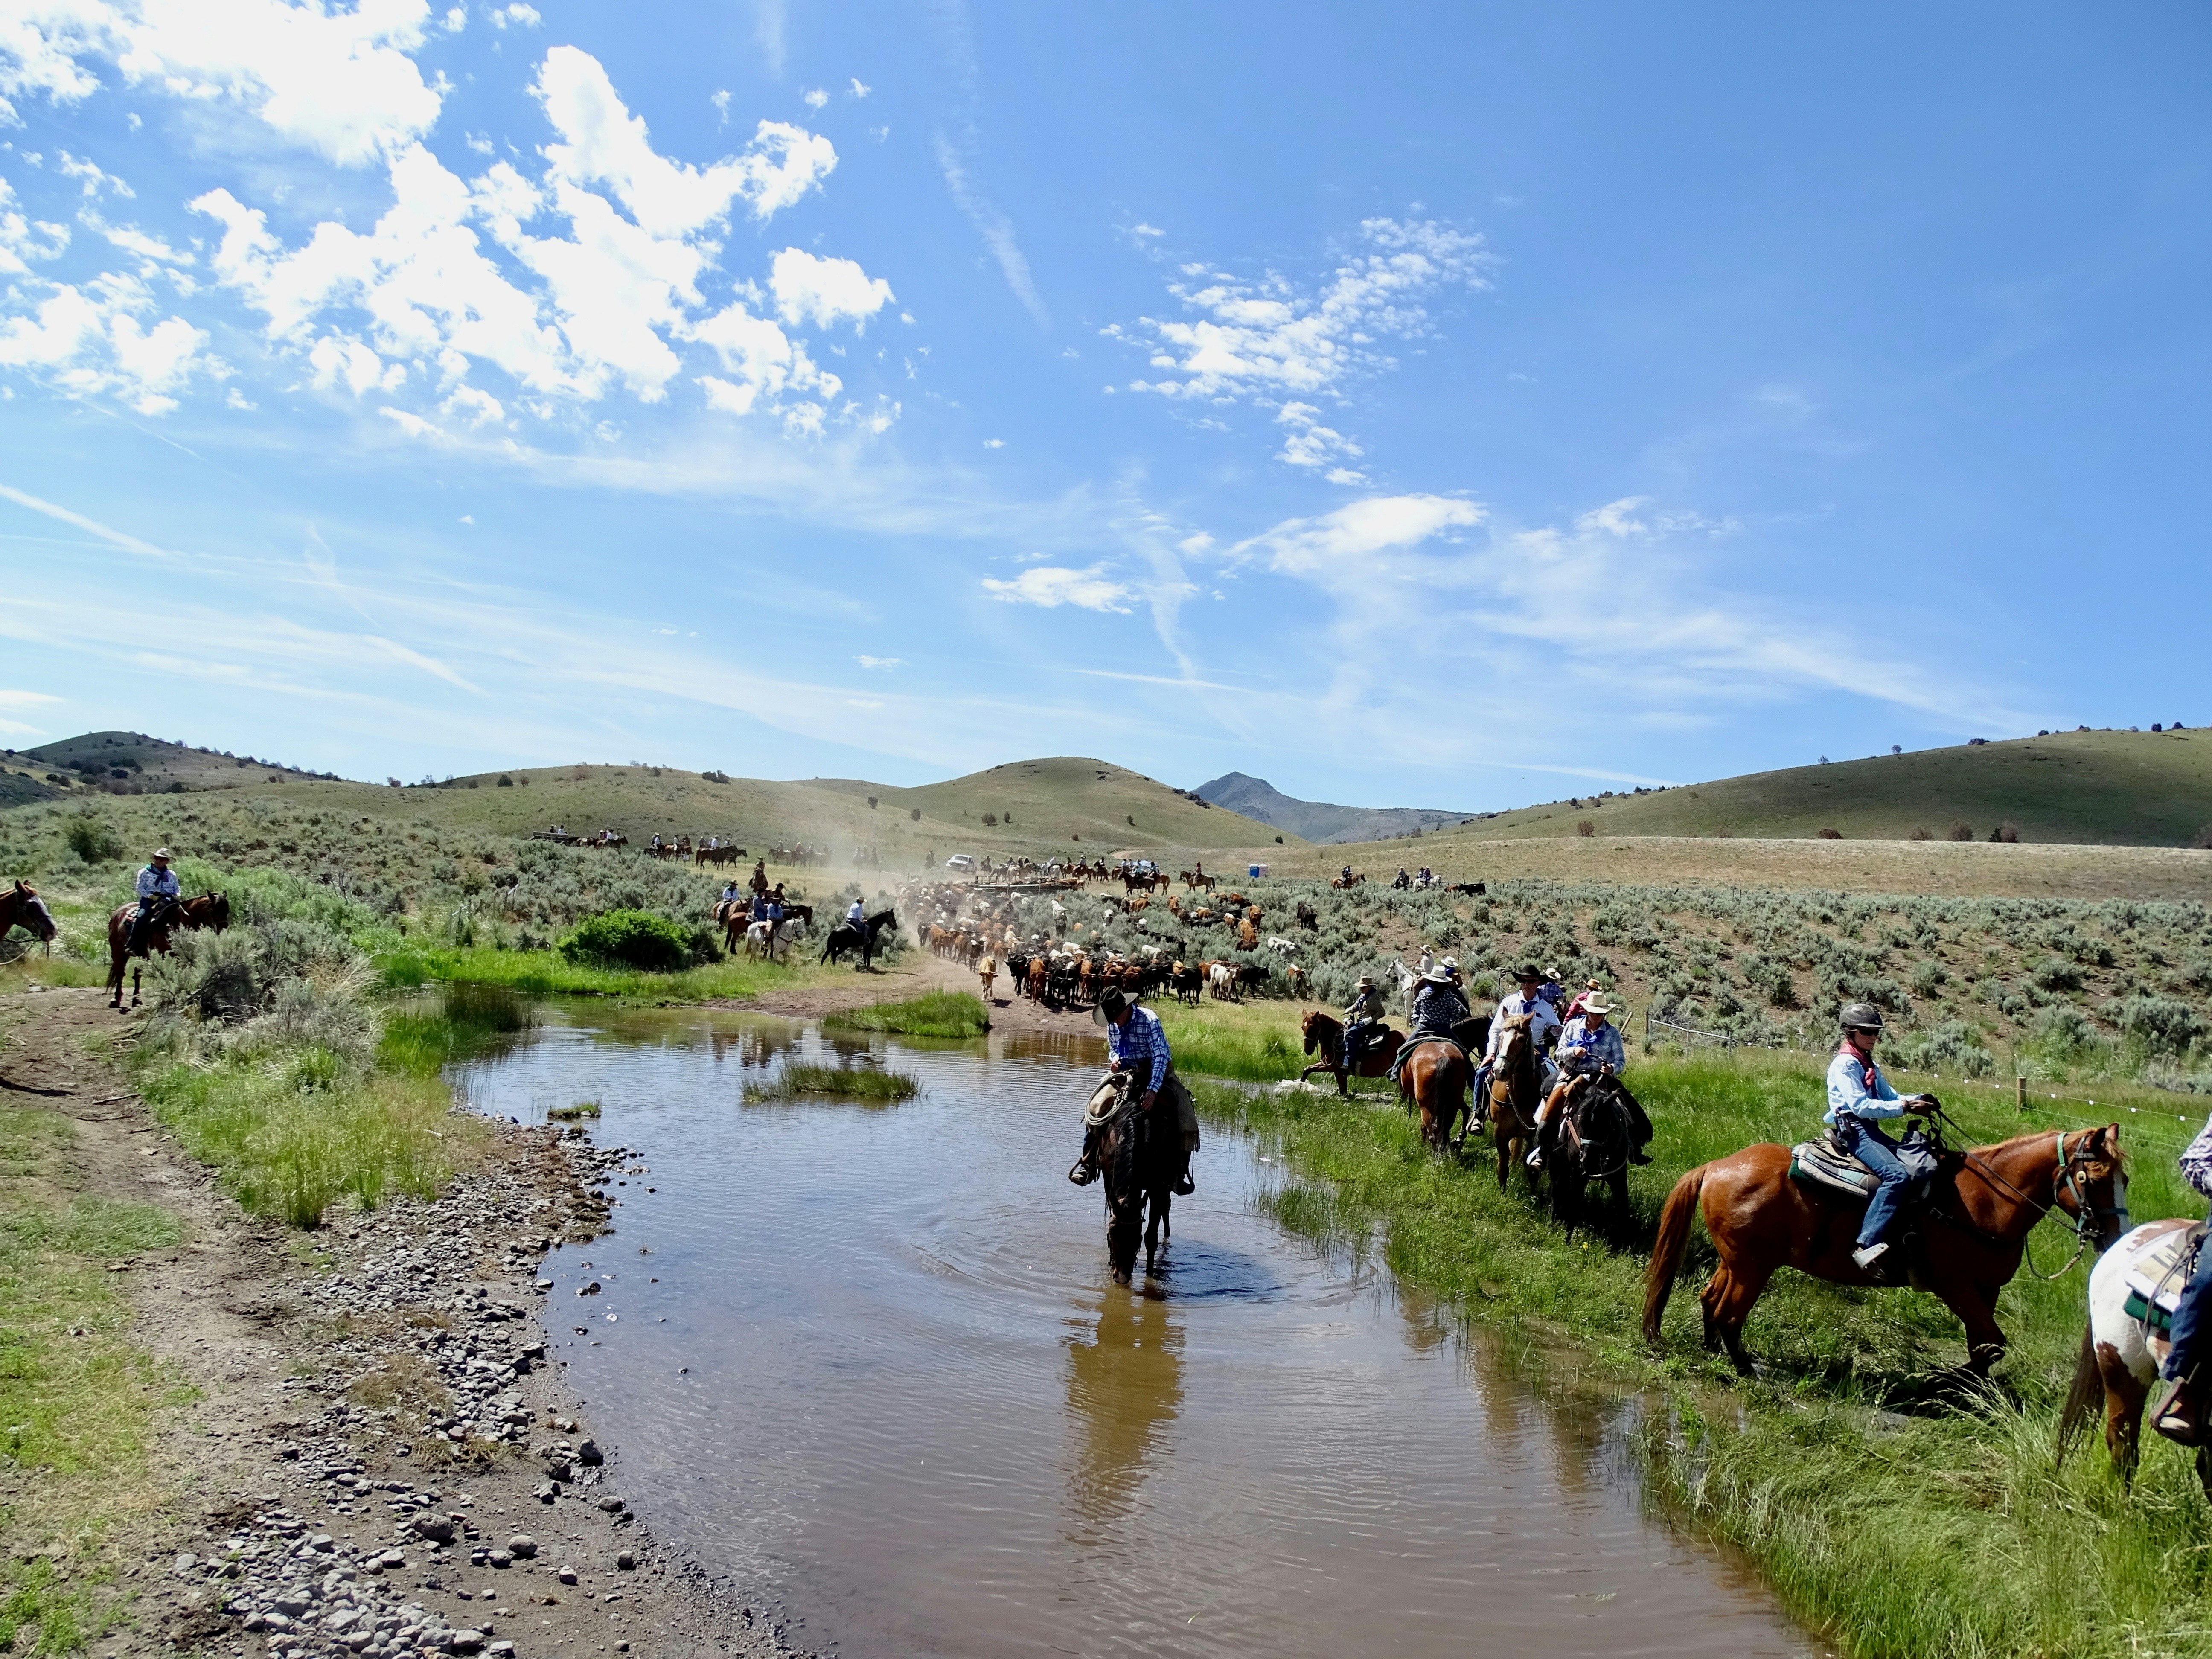 A horse stops for water, with other horseback riders around